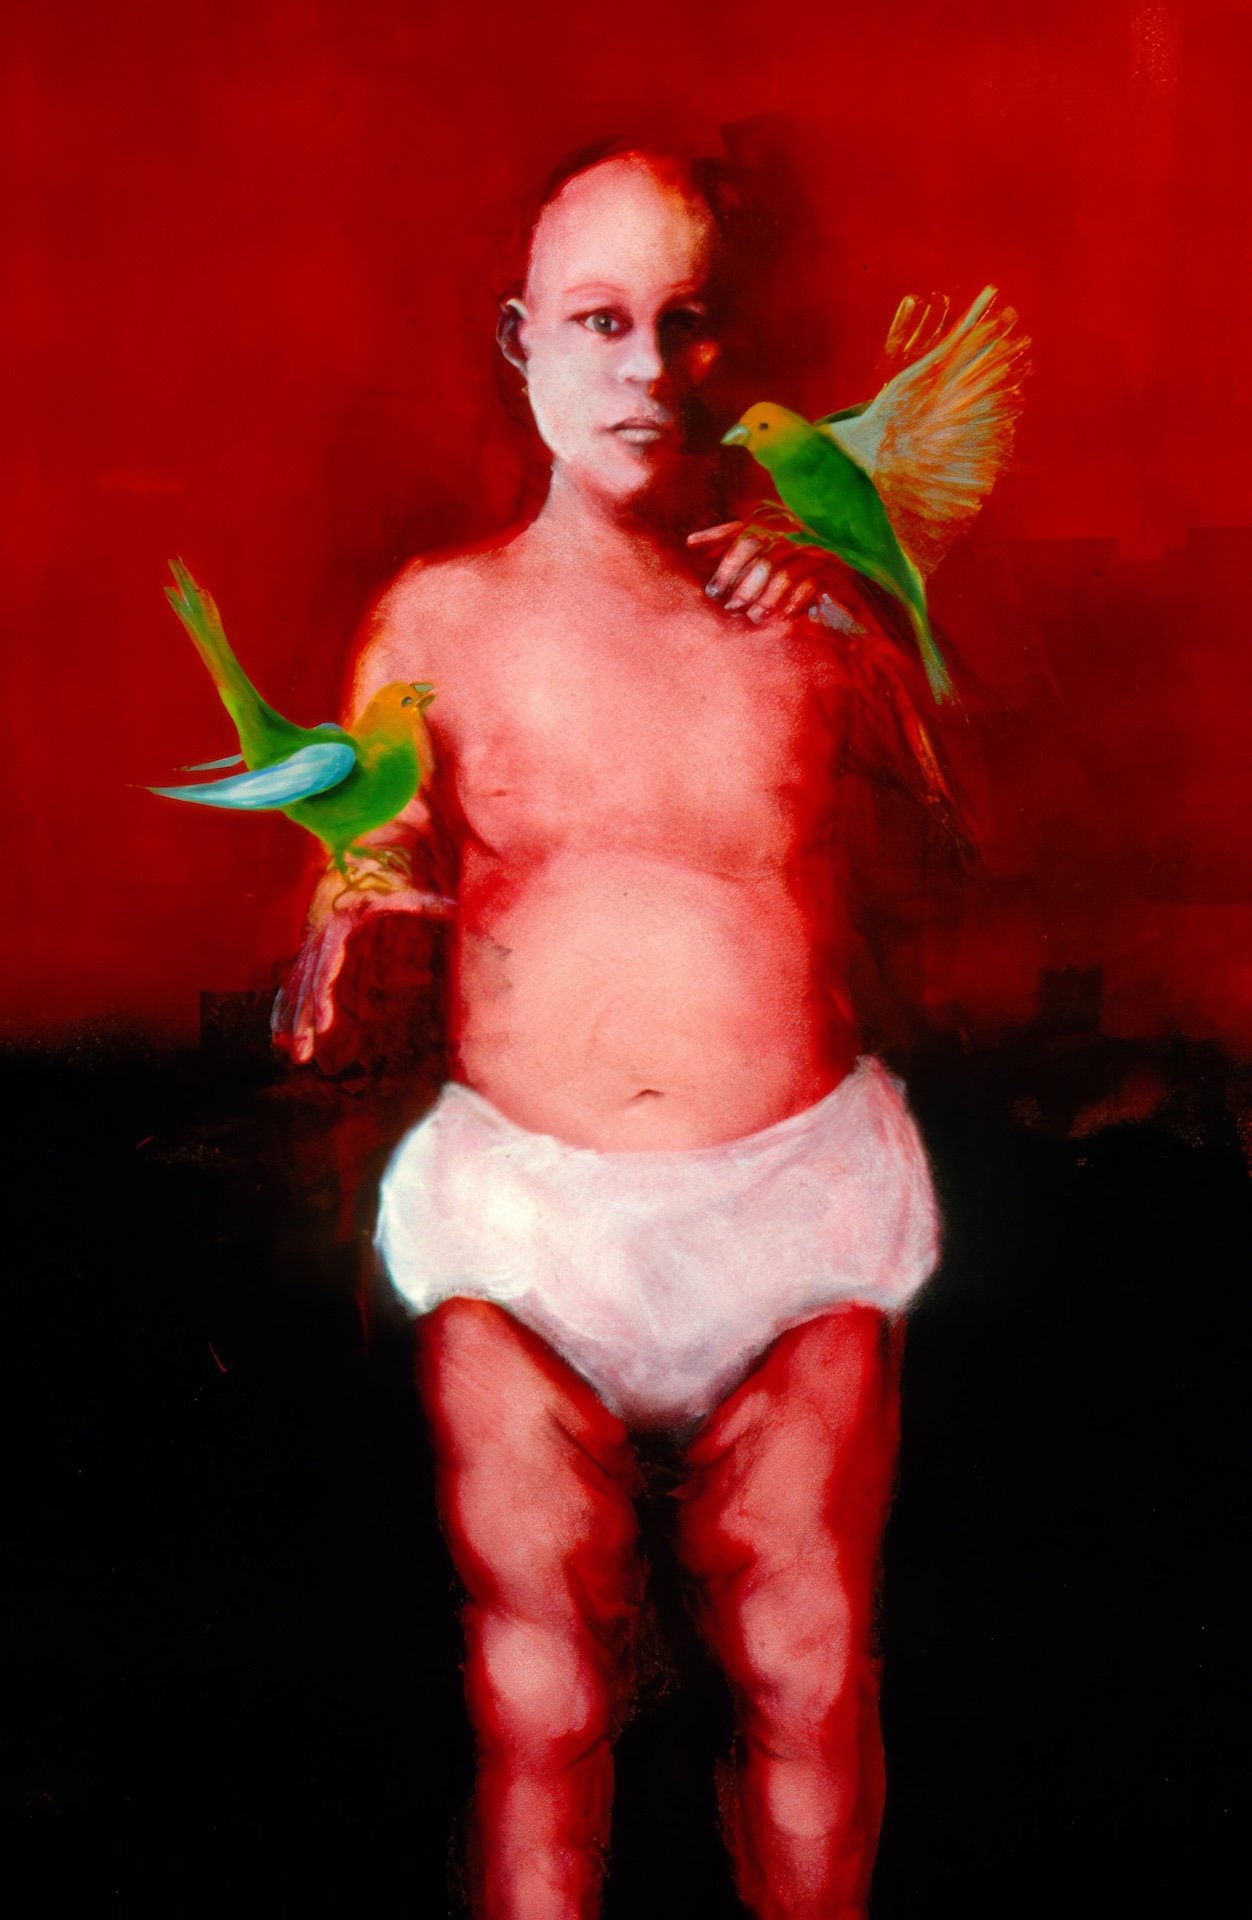 Baby with Birds, 56" x 41", oil on paper